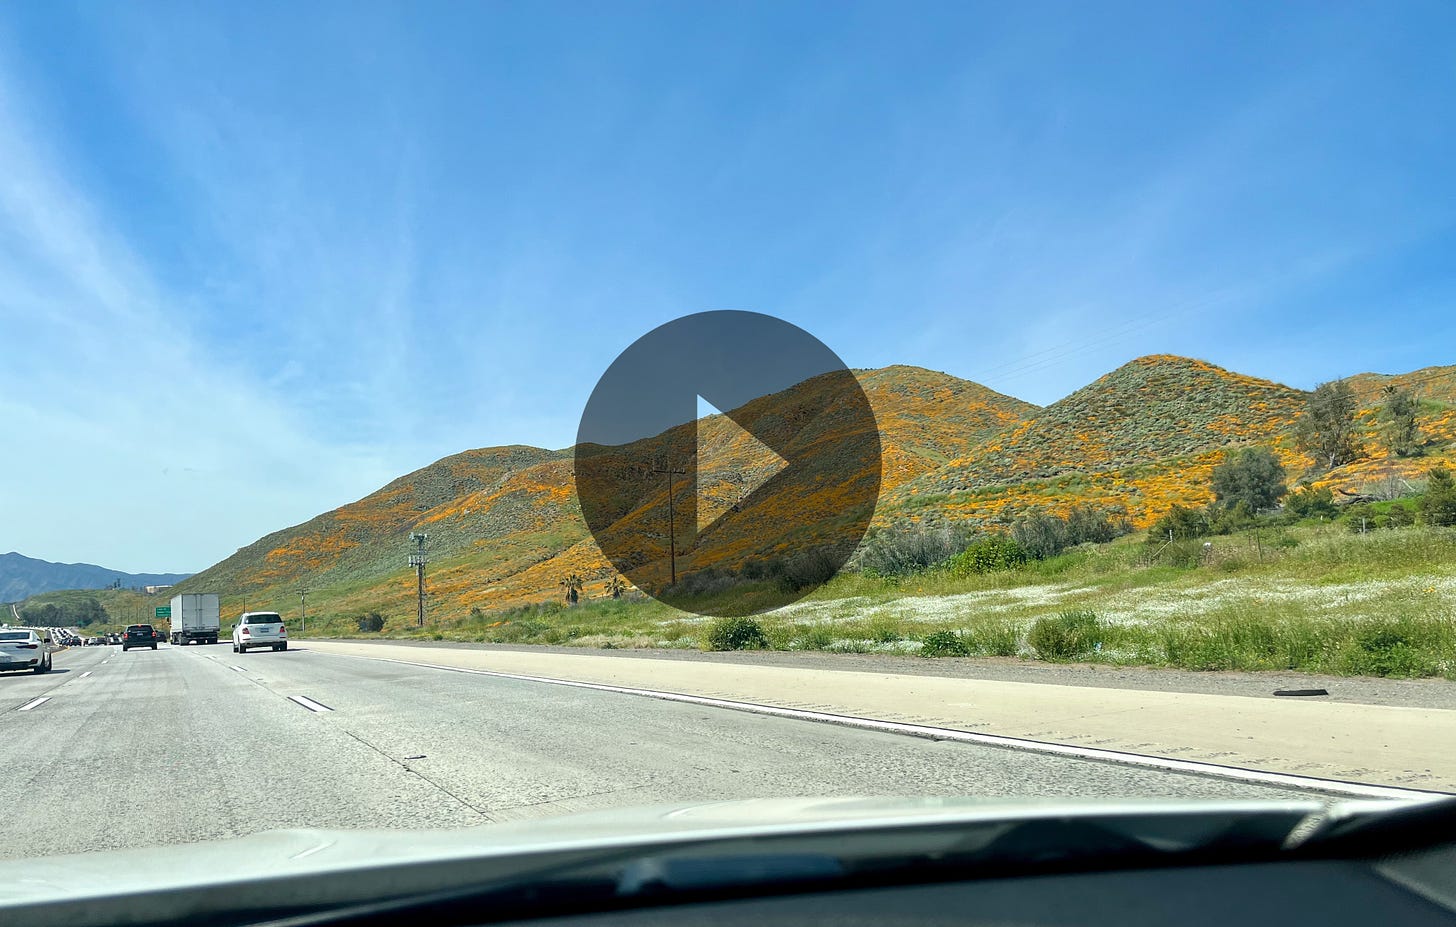 A photo with a play button on top of it. The play button is taken from the passenger seat of a car driving on the freeway. There's a road ahead and, to the side, hills covered in yellow poppy flowers. The blue sky is above.